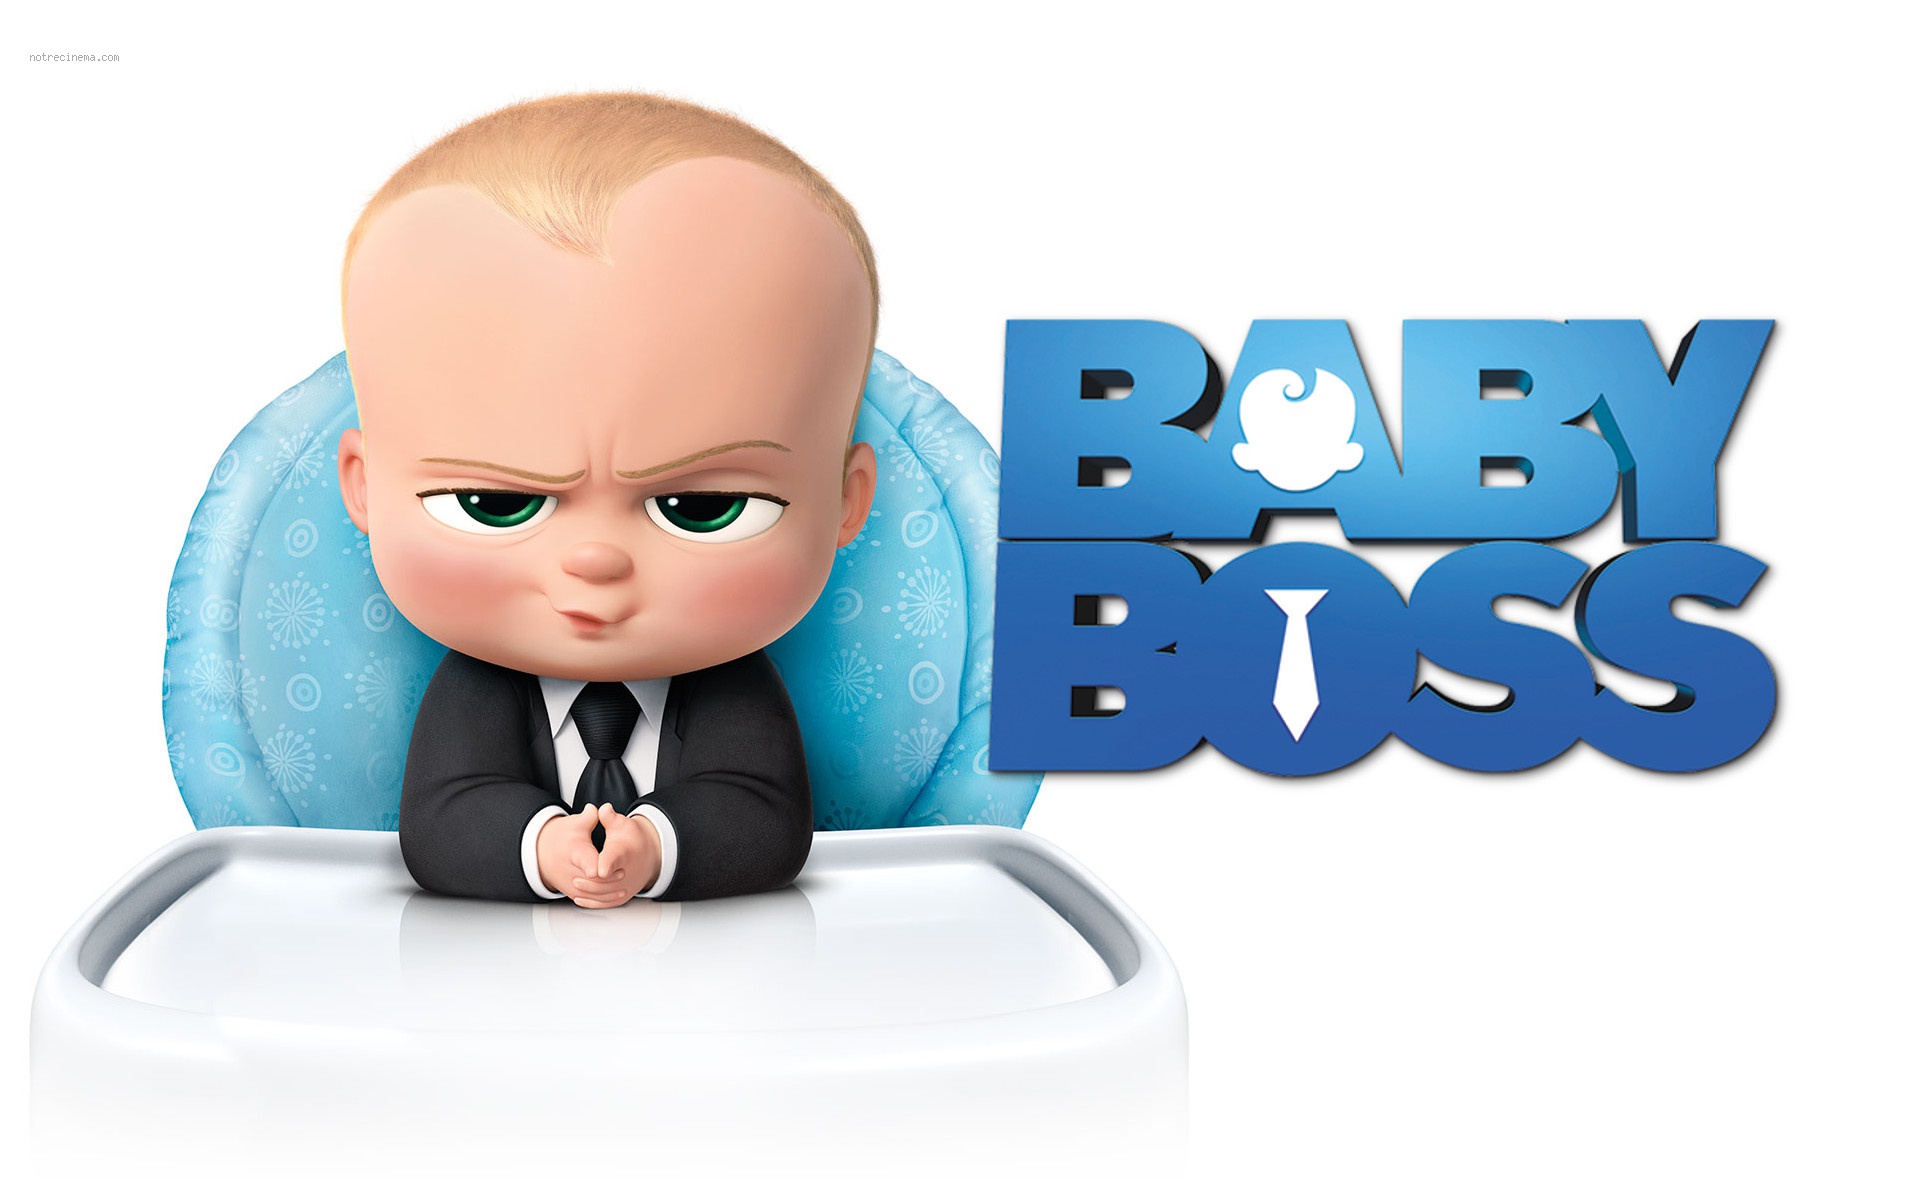 Download Wallpaper The Boss Baby - Boss Baby Banner On Itl.cat